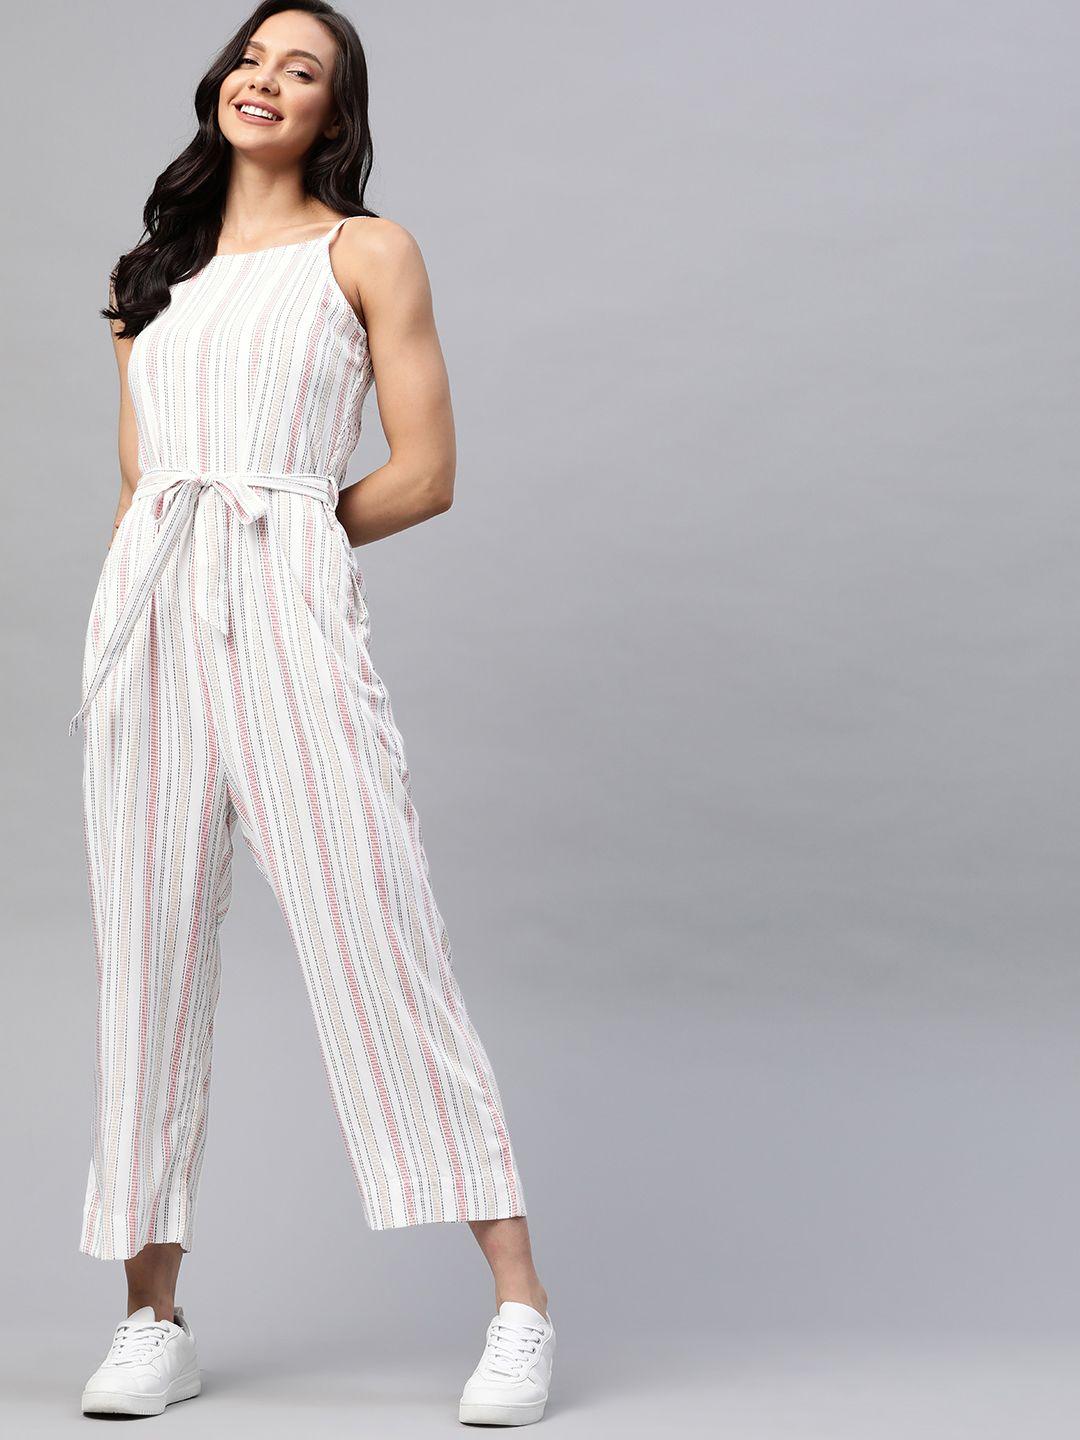 mast & harbour white & red striped basic jumpsuit